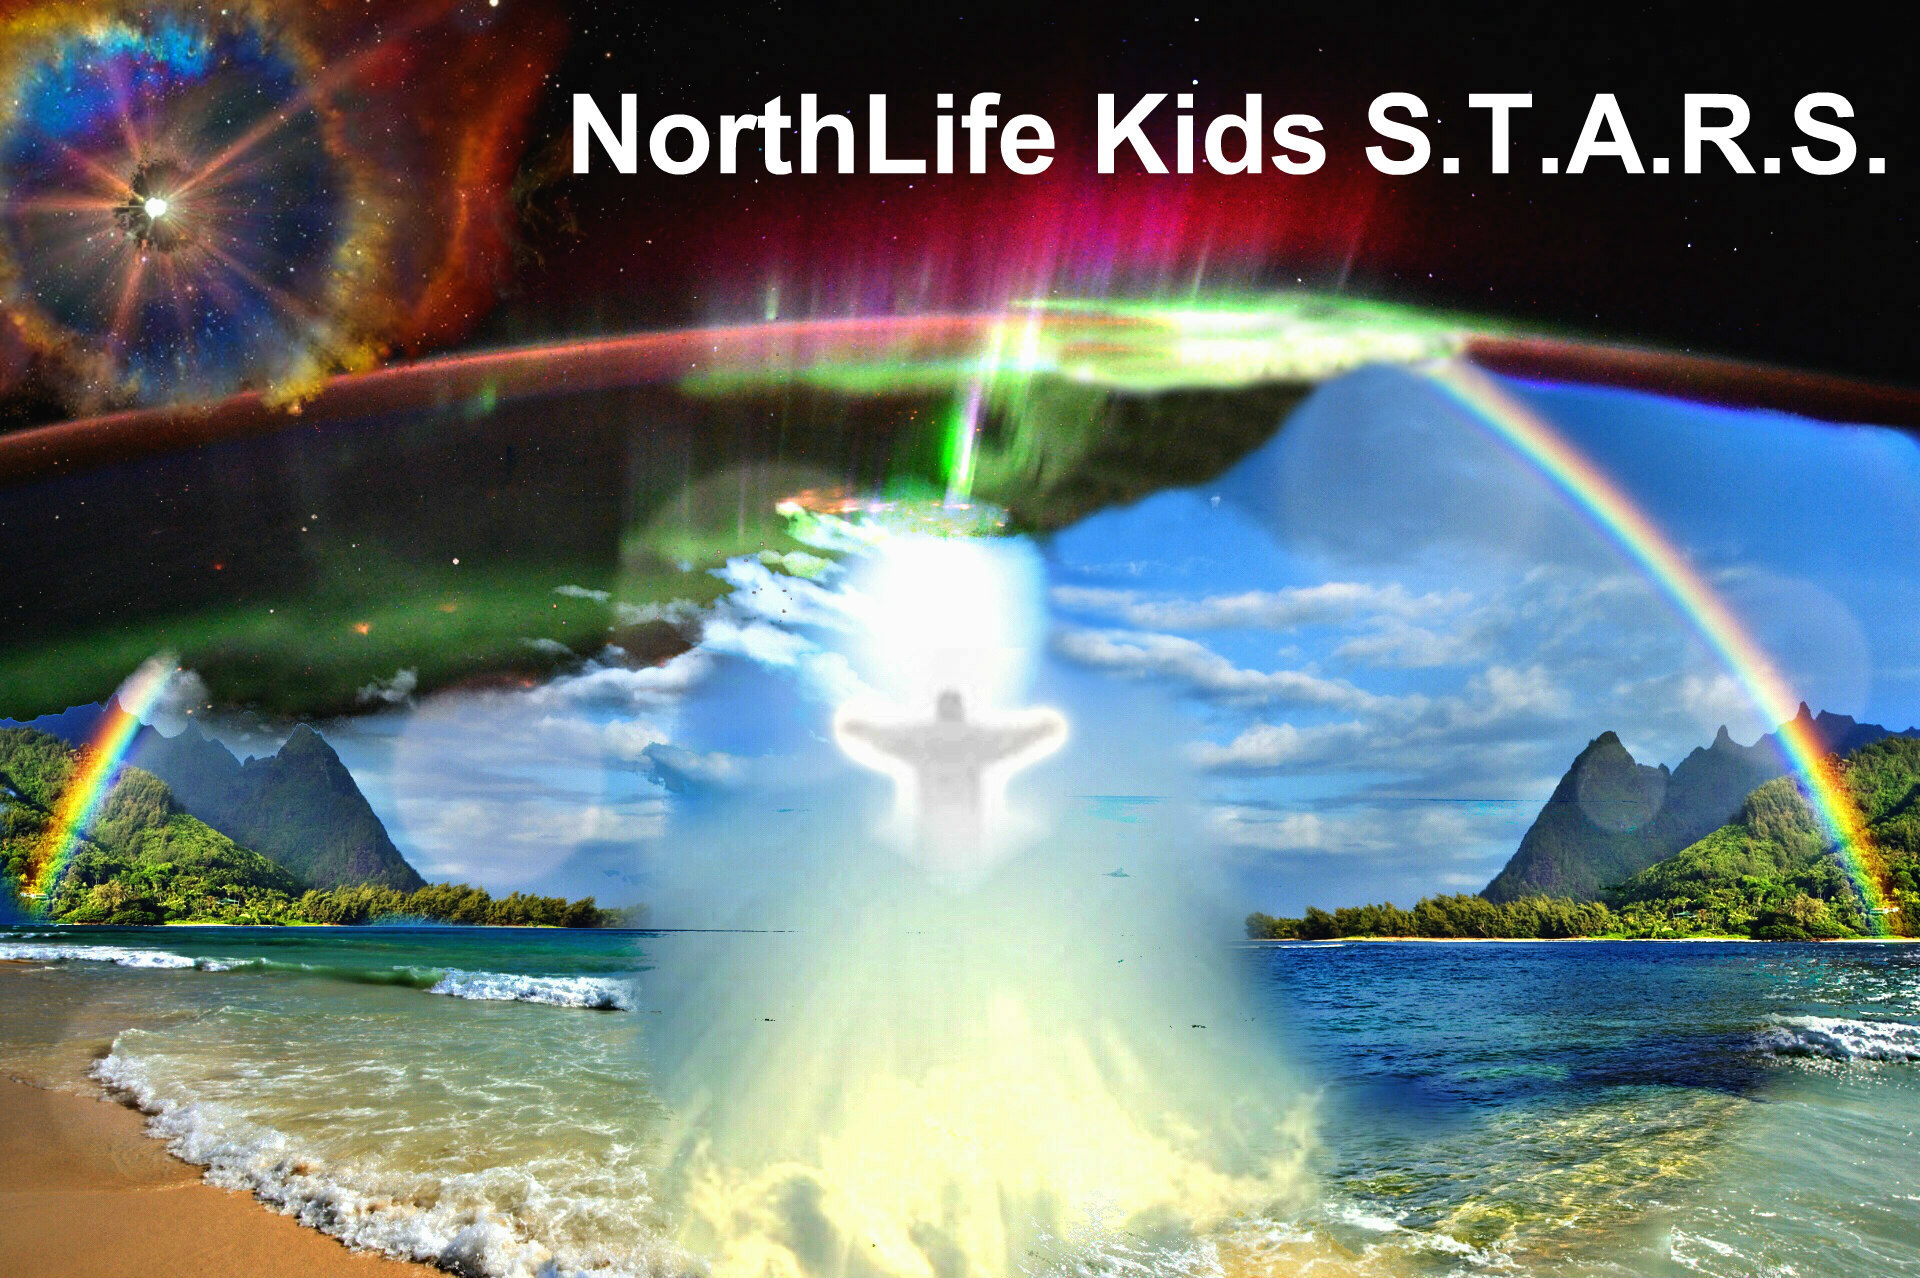 NorthLife Kids S.T.A.R.S.